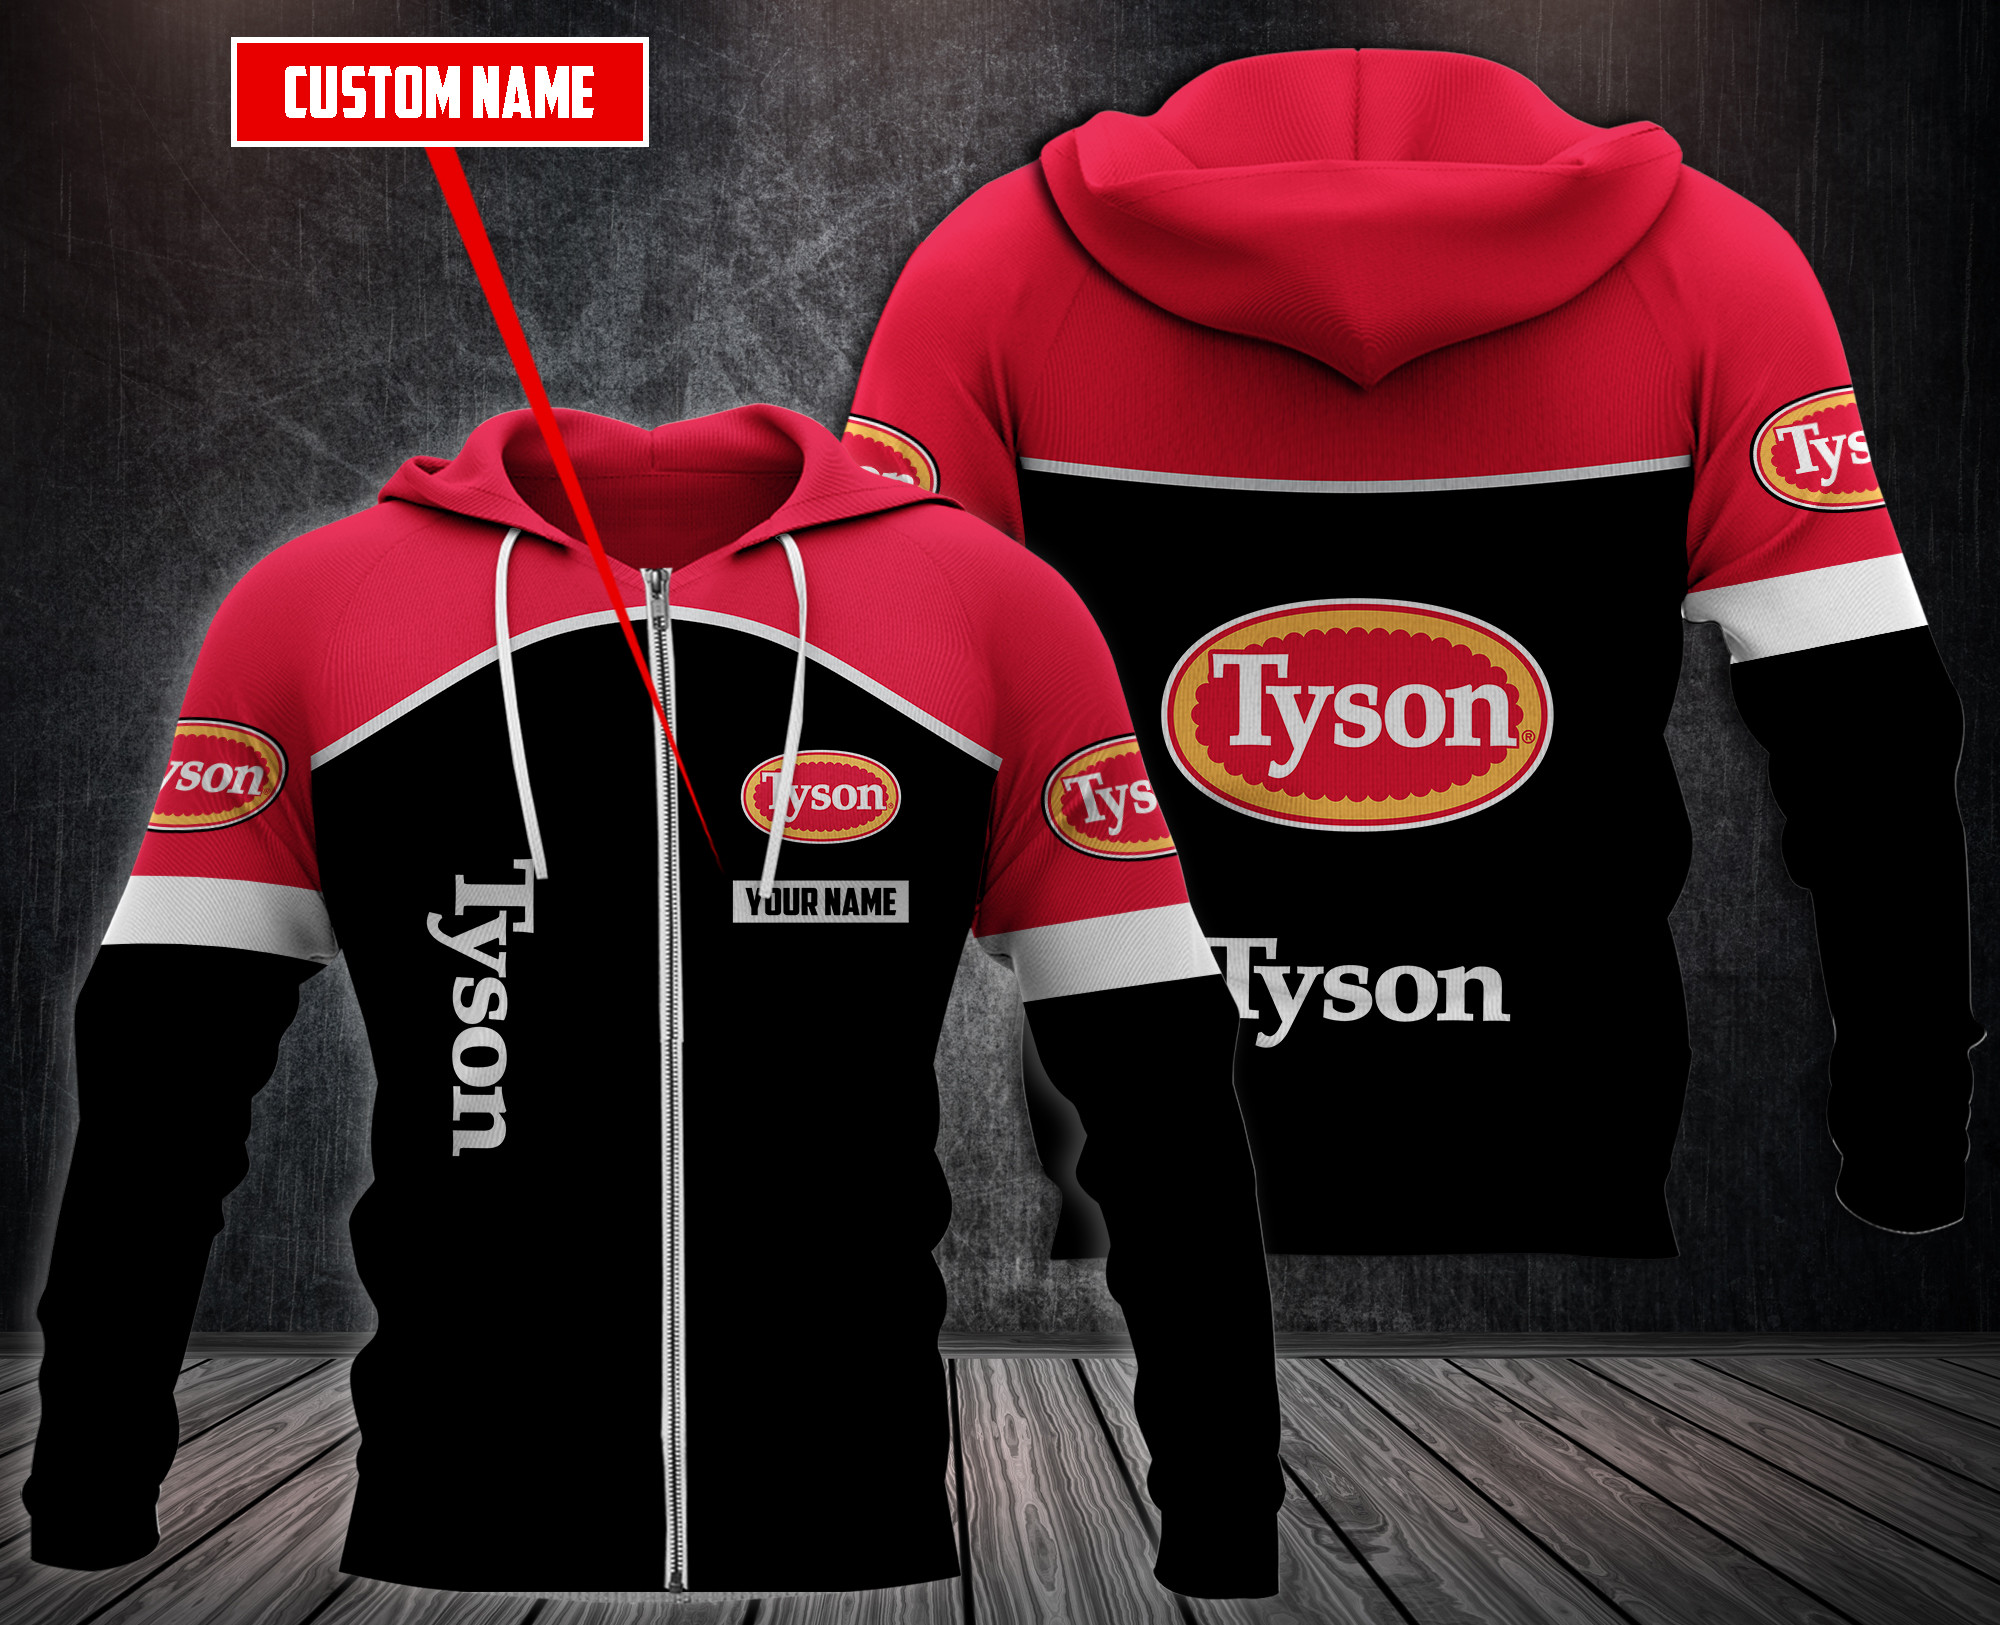 Choose the right hoodies for you on our boxboxshirt and ethershirt websites in 2022 92